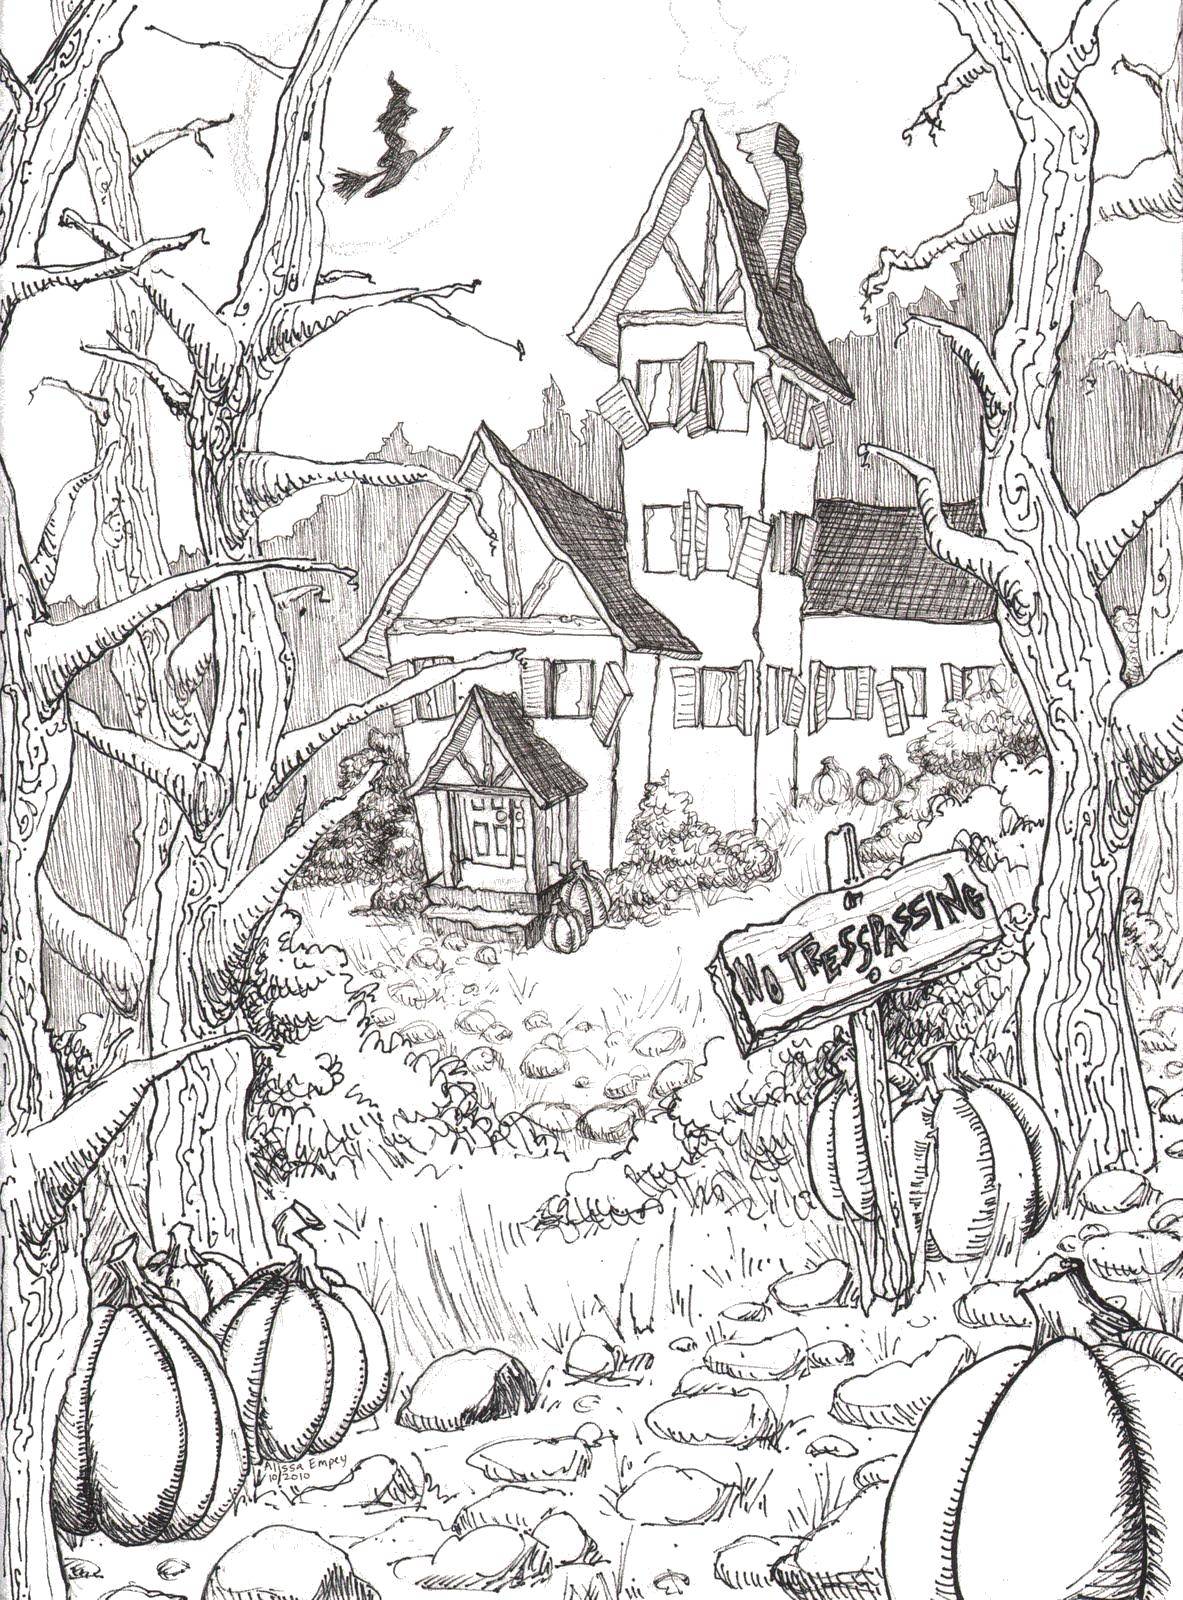 Coloring Abandoned house with ghosts. Category Halloween. Tags:  Halloween, pumpkin.